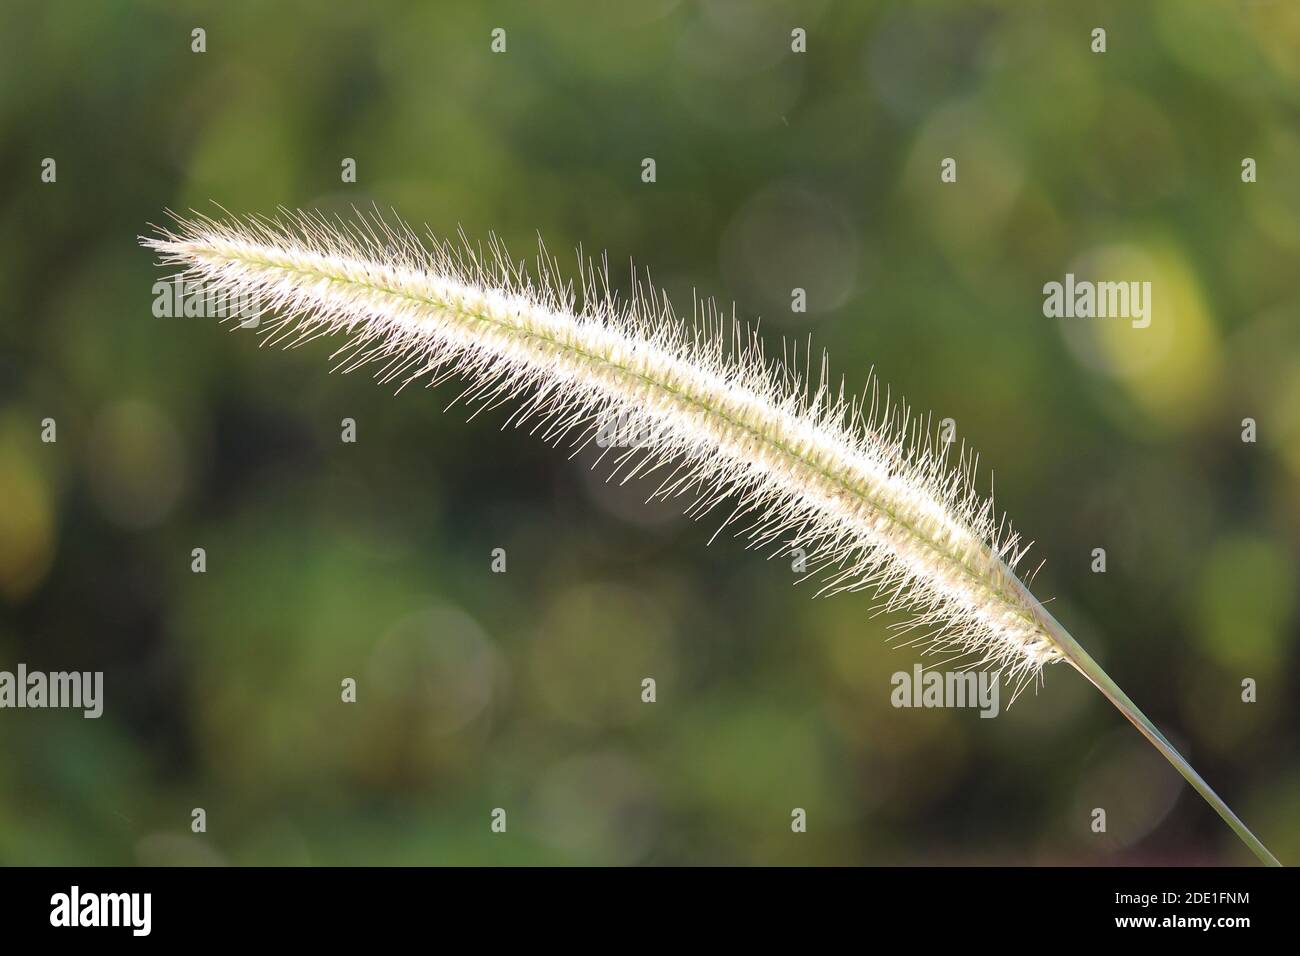 Grass flowers stand against the wind and sunlight Stock Photo